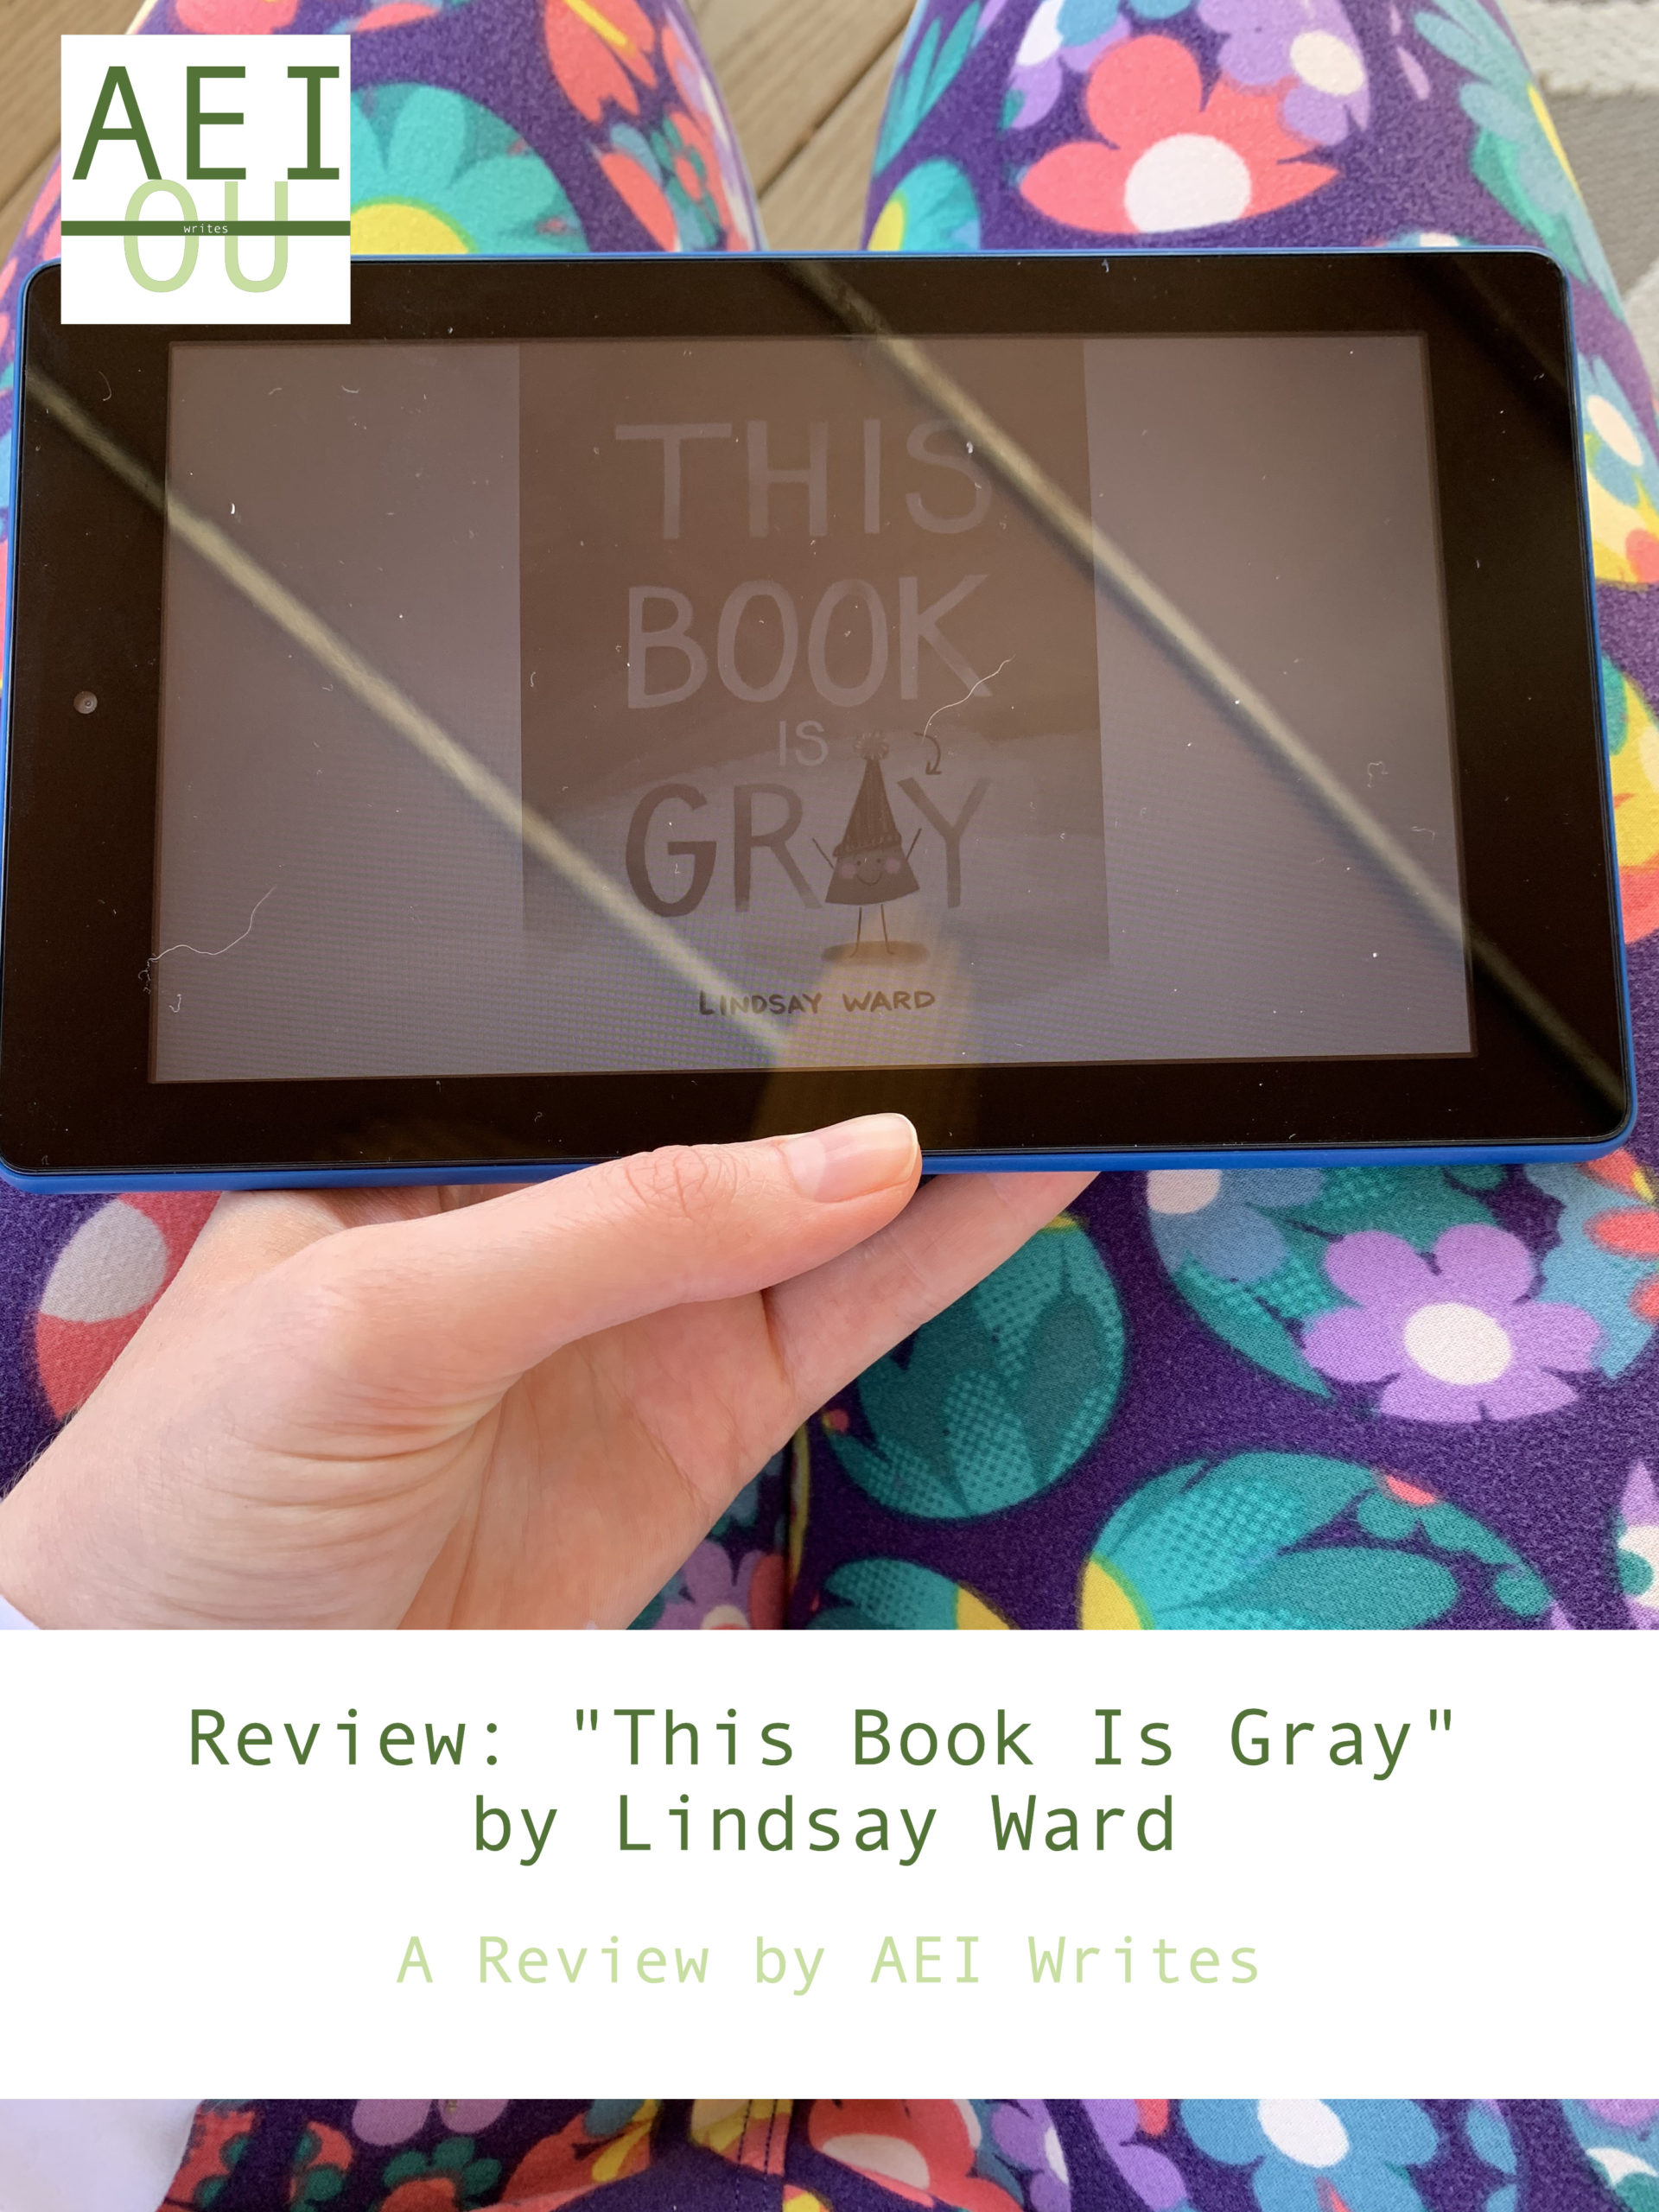 Review: “This Book Is Gray” by Lindsay Ward